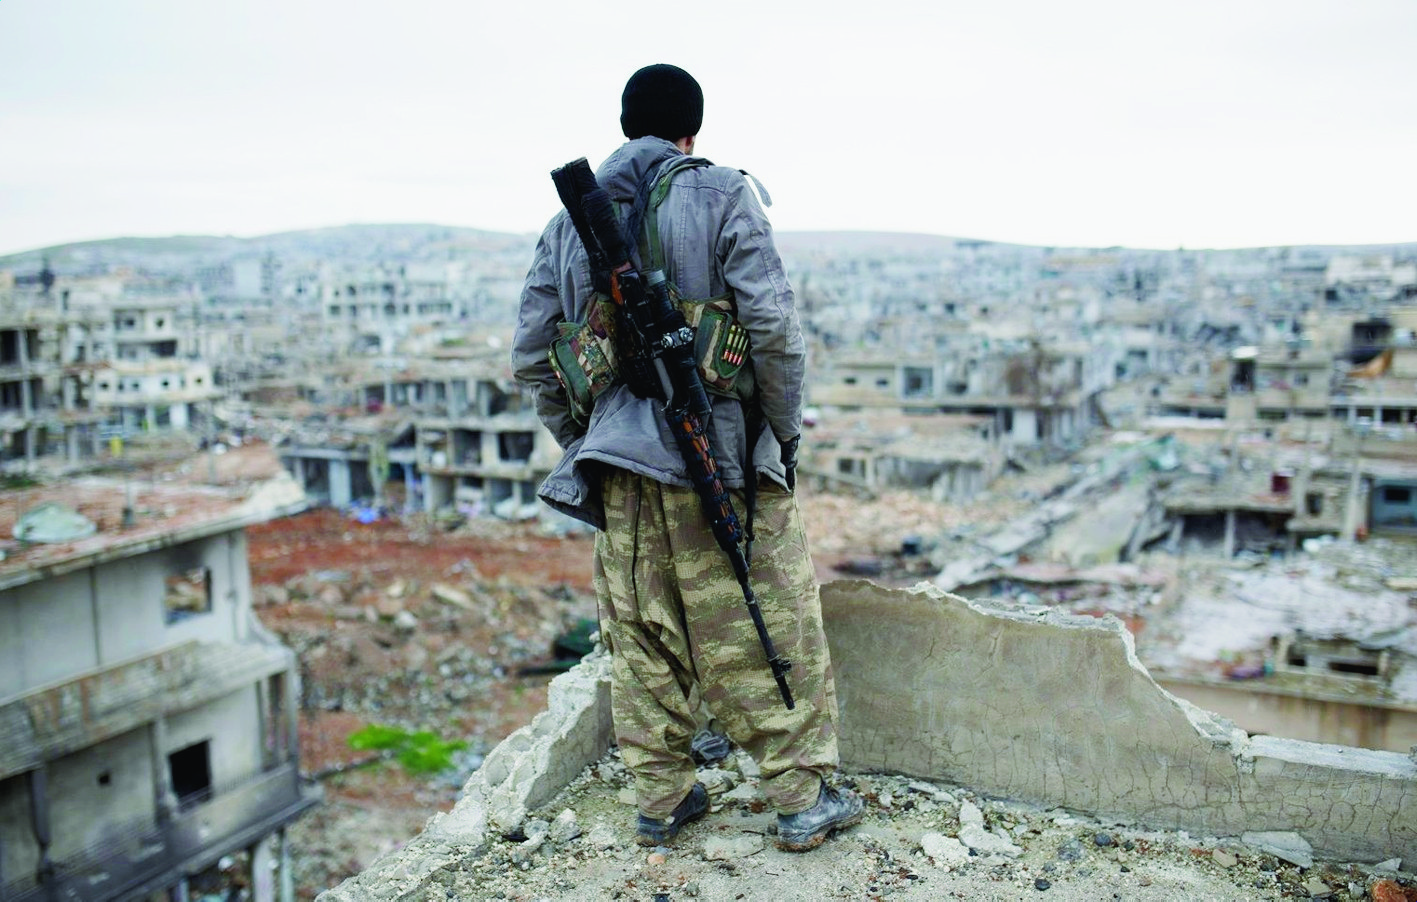 FILE - In this Jan. 30, 2015 file photo, a Syrian Kurdish sniper looks at the rubble in the Syrian city of Ain al-Arab, also known as Kobani. Foreign fighters are streaming in unprecedented numbers to Syria and Iraq to battle for the Islamic State or other U.S. foes, including at least 3,400 from Western nations and 150 Americans, U.S. intelligence officials conclude. In all, more than 20,000 fighters have traveled to Syria from more than 90 countries, top intelligence officials will tell Congress this week.  (AP Photo, File) Islamic State Foreign Fighters